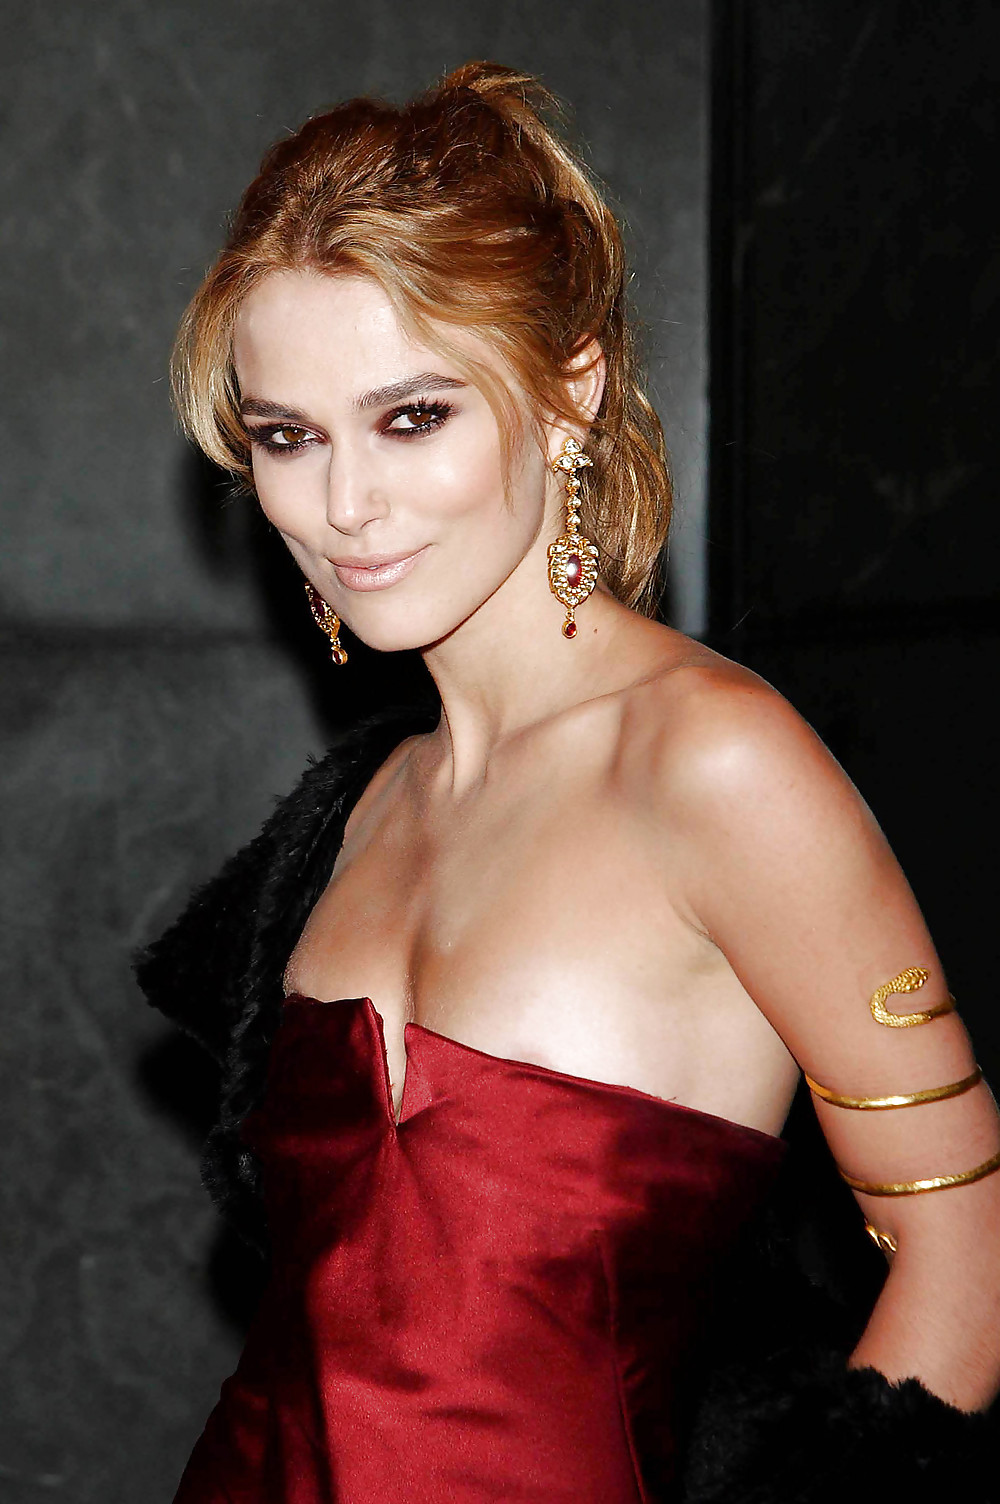 Keira Knightley The Royal Lady of England #35650430